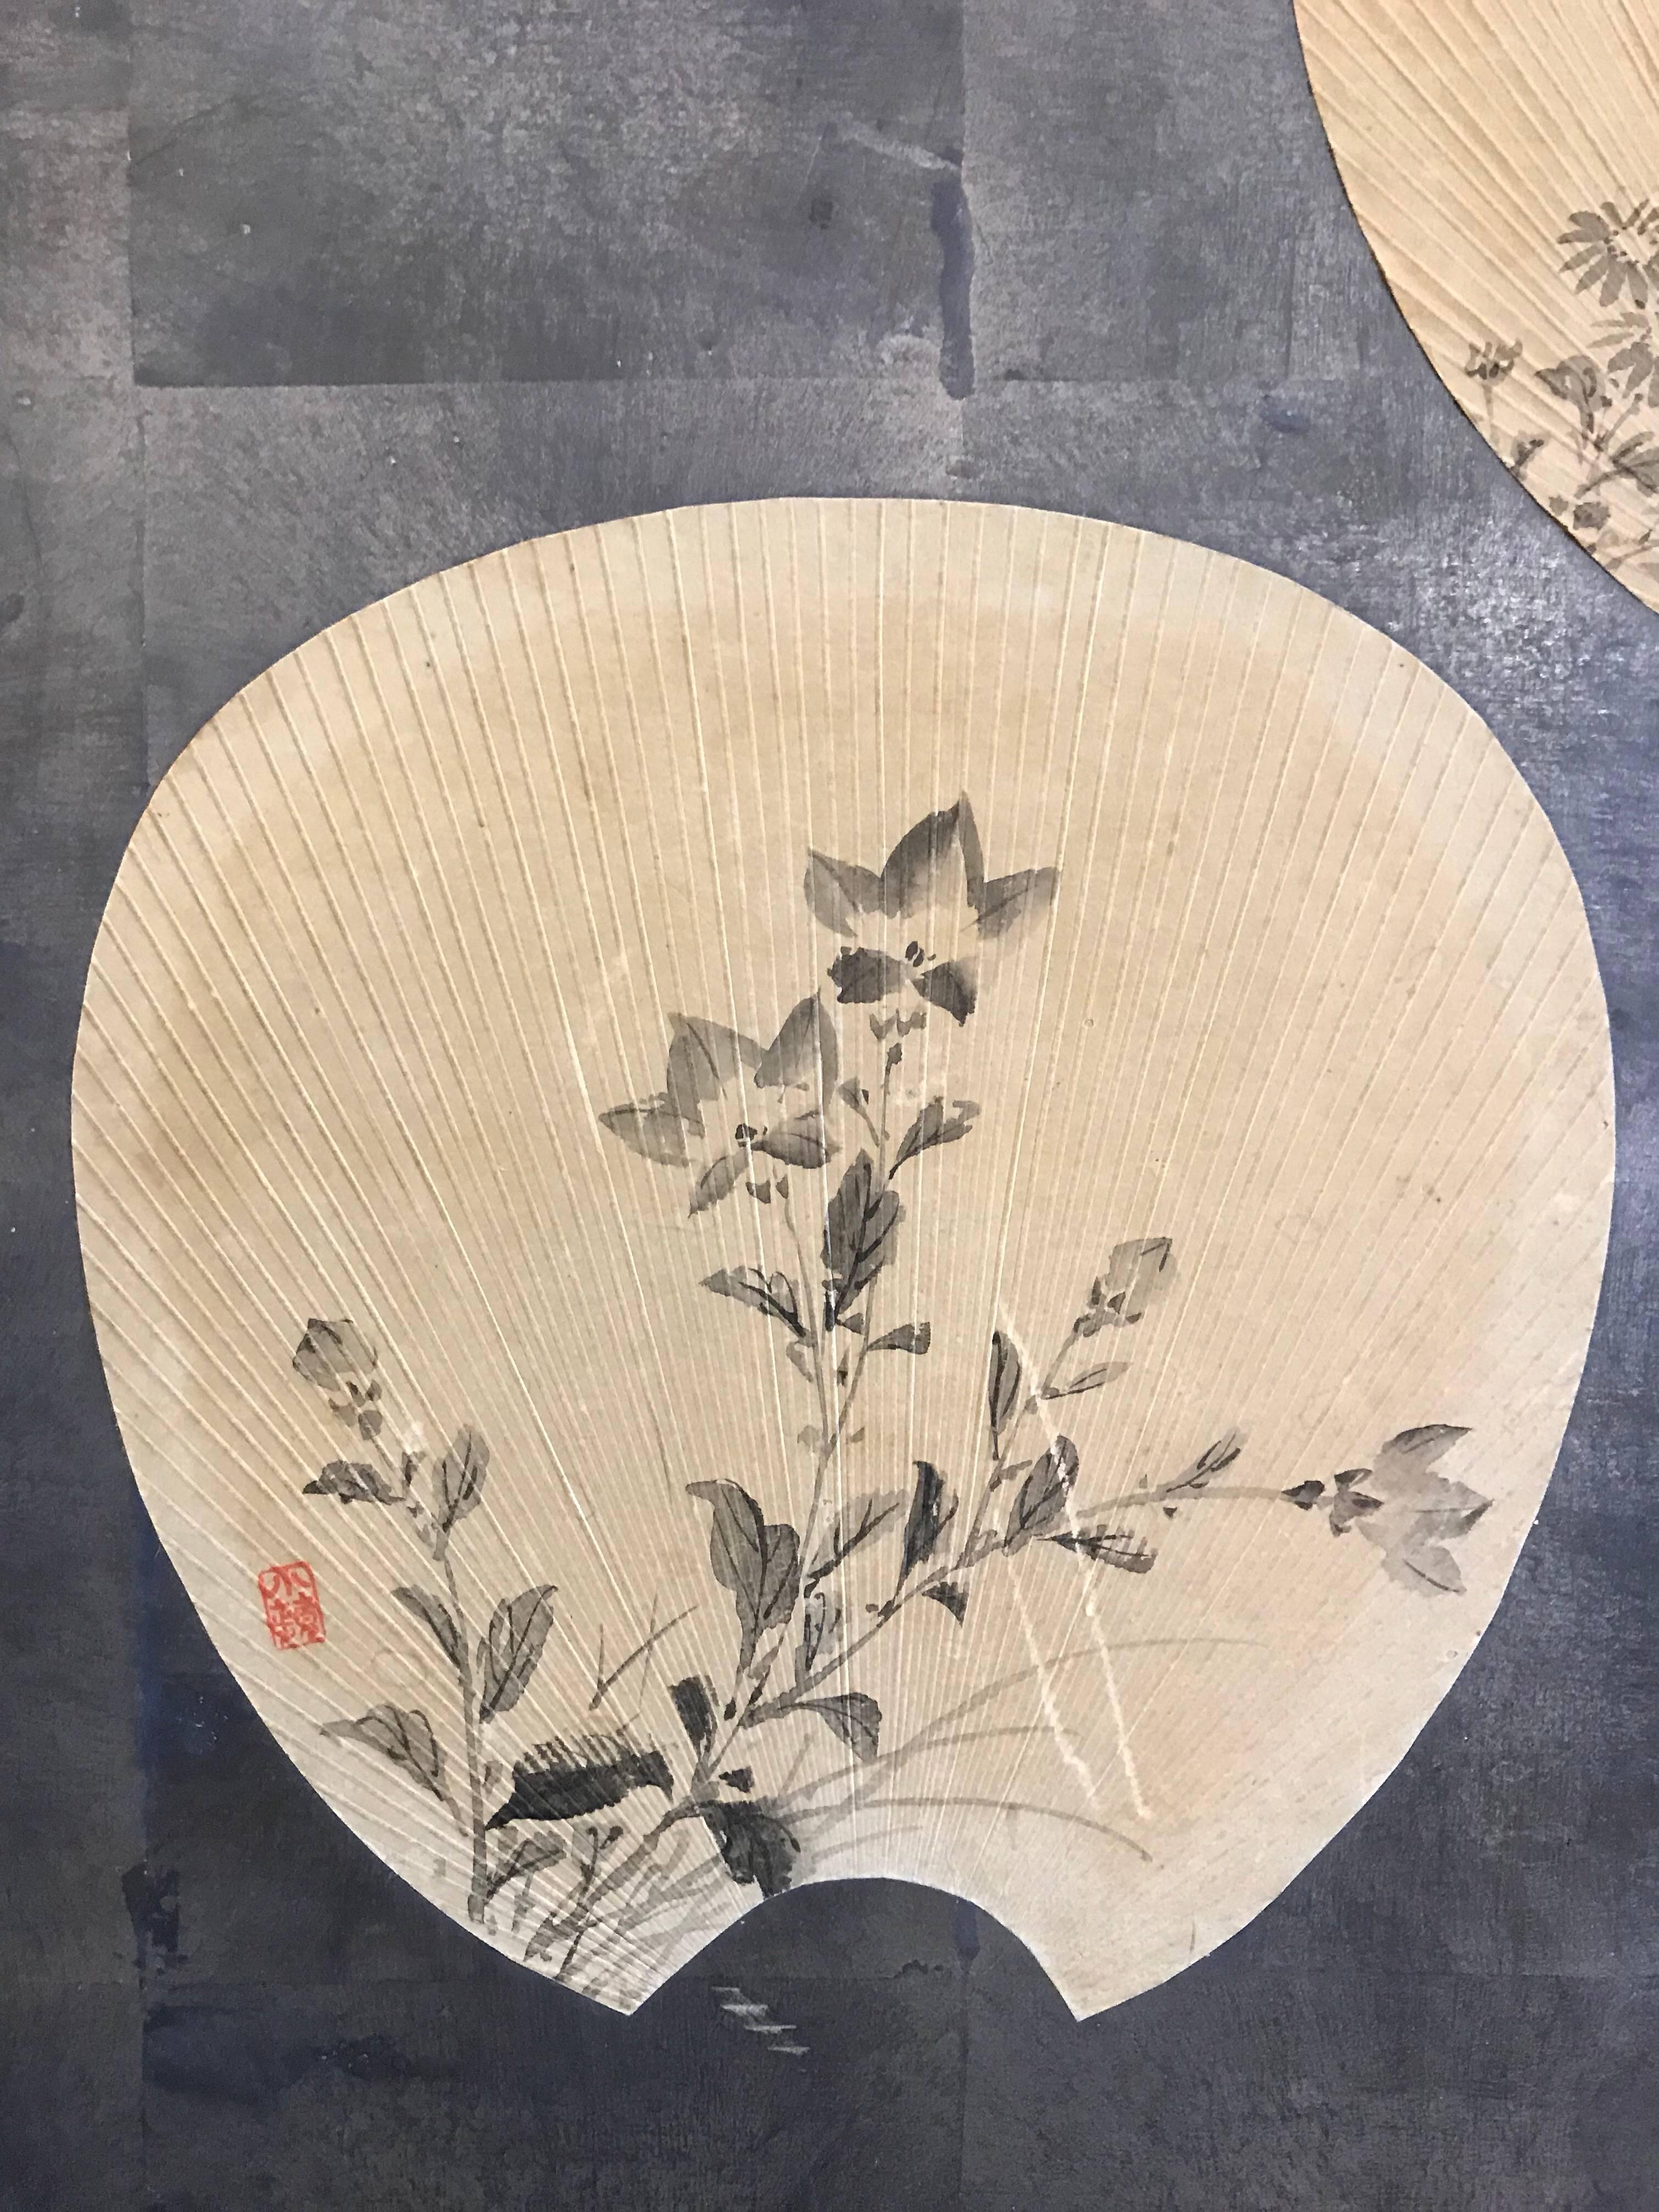 A beautiful two-fold antique Japanese screen with silver leaf background, and design of scattered fans.

Fans have various floral patterns. The screen has a traditional black lacquer frame.

Measures: Each panel is 35